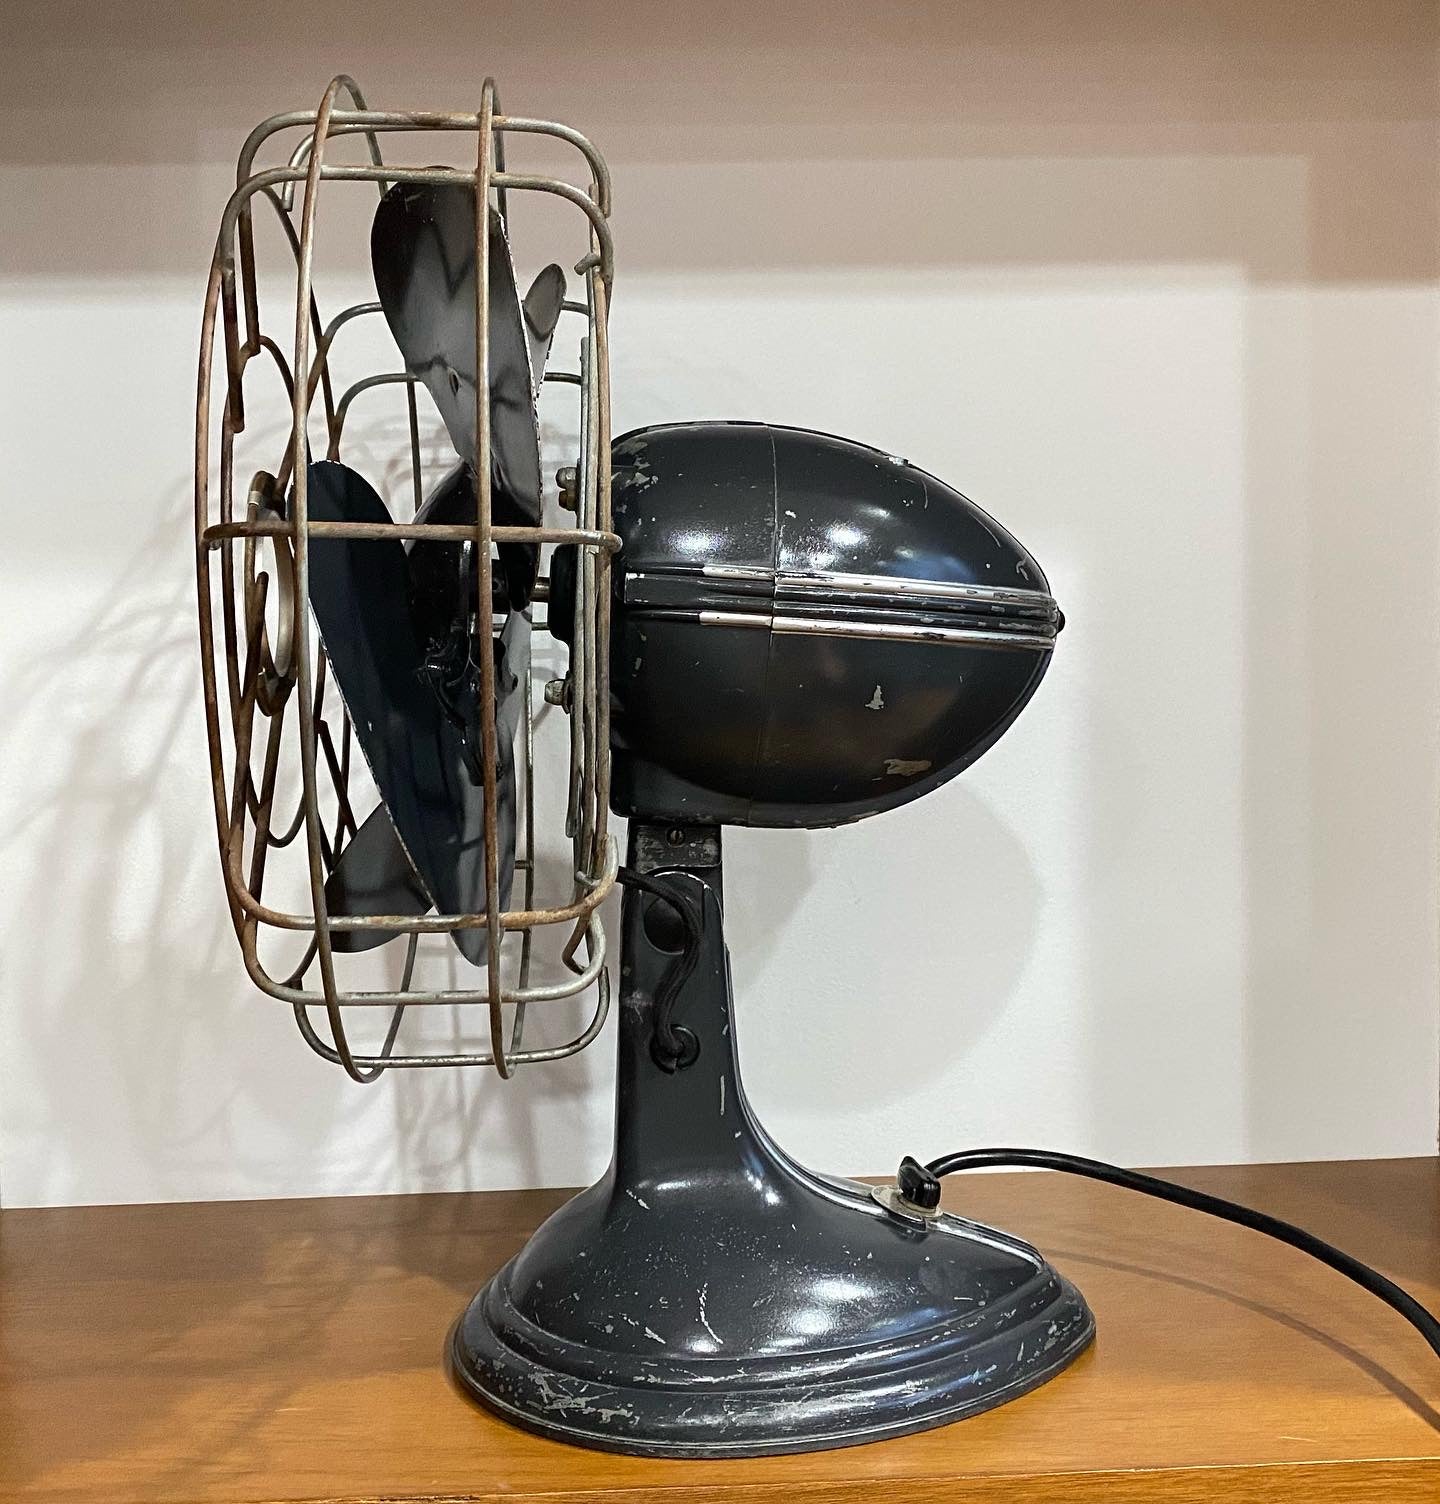 Robbins & Myers Mid-Century Electric Three-Speed Industrial style Table Fan